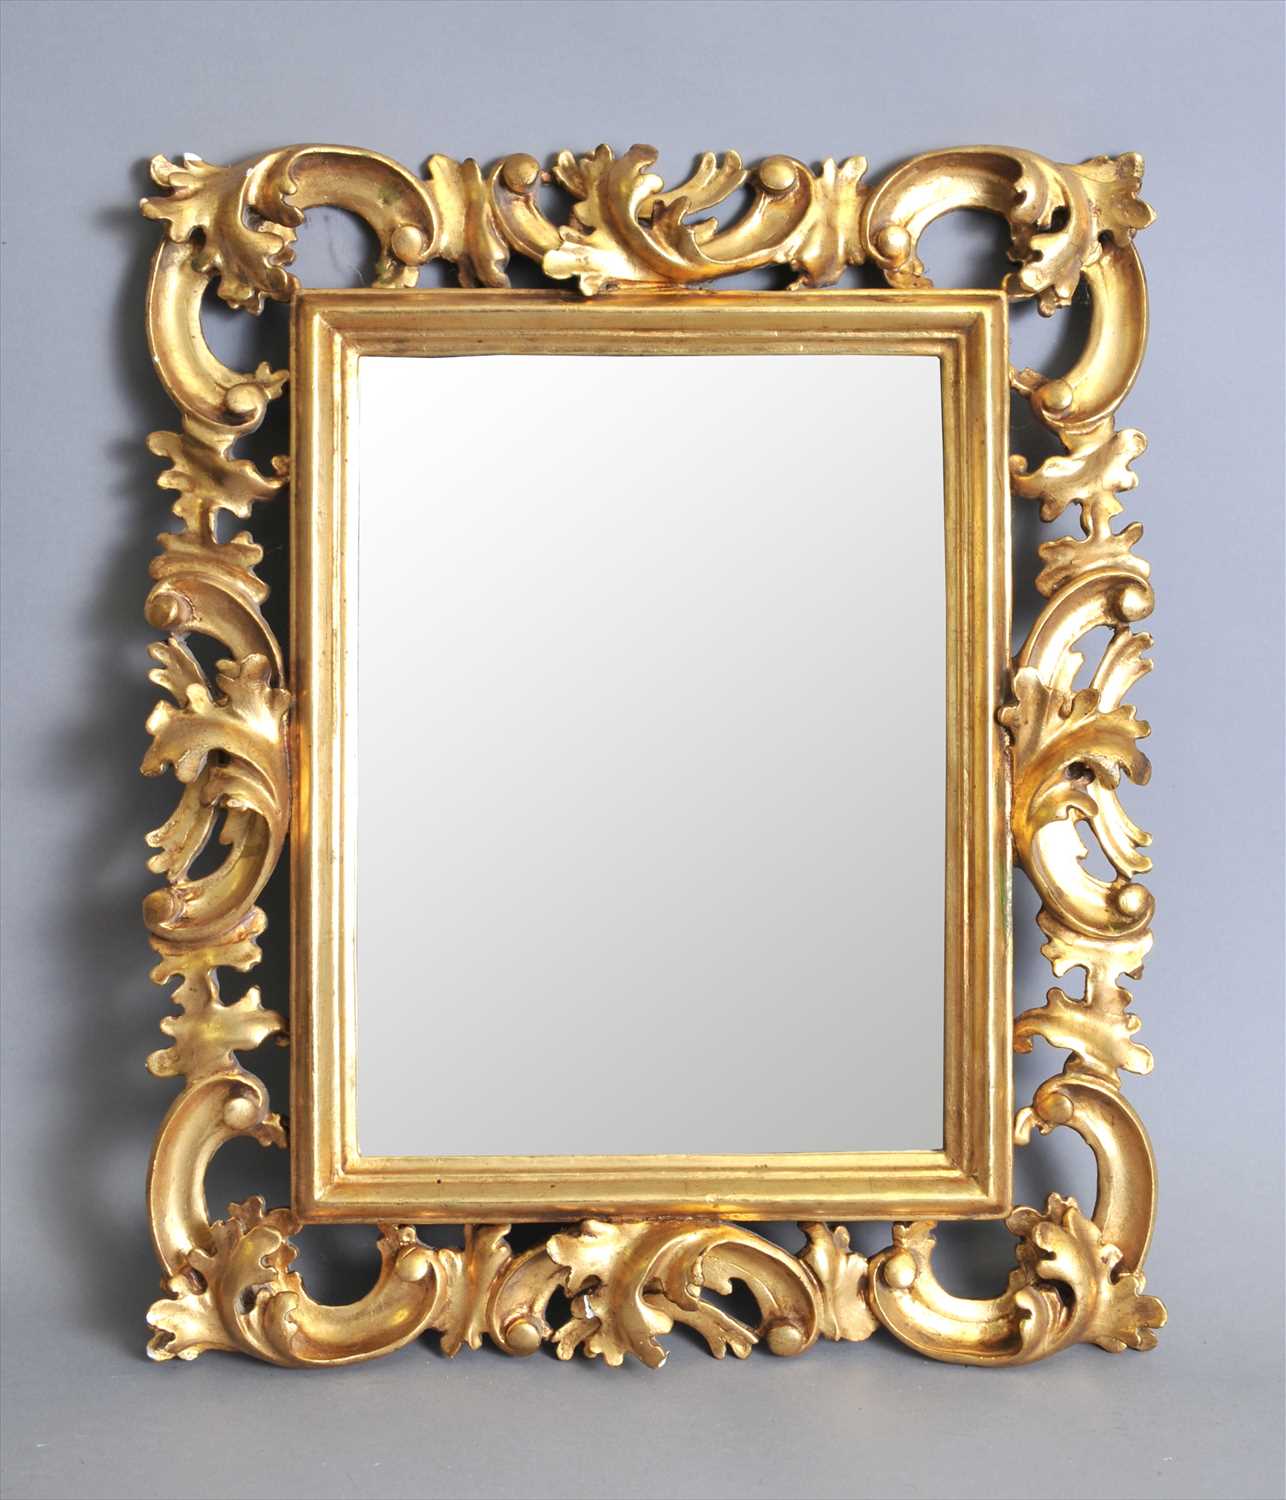 Lot 617 - A decorative 19th century gilt wood and plaster Florentine type frame (mirror)